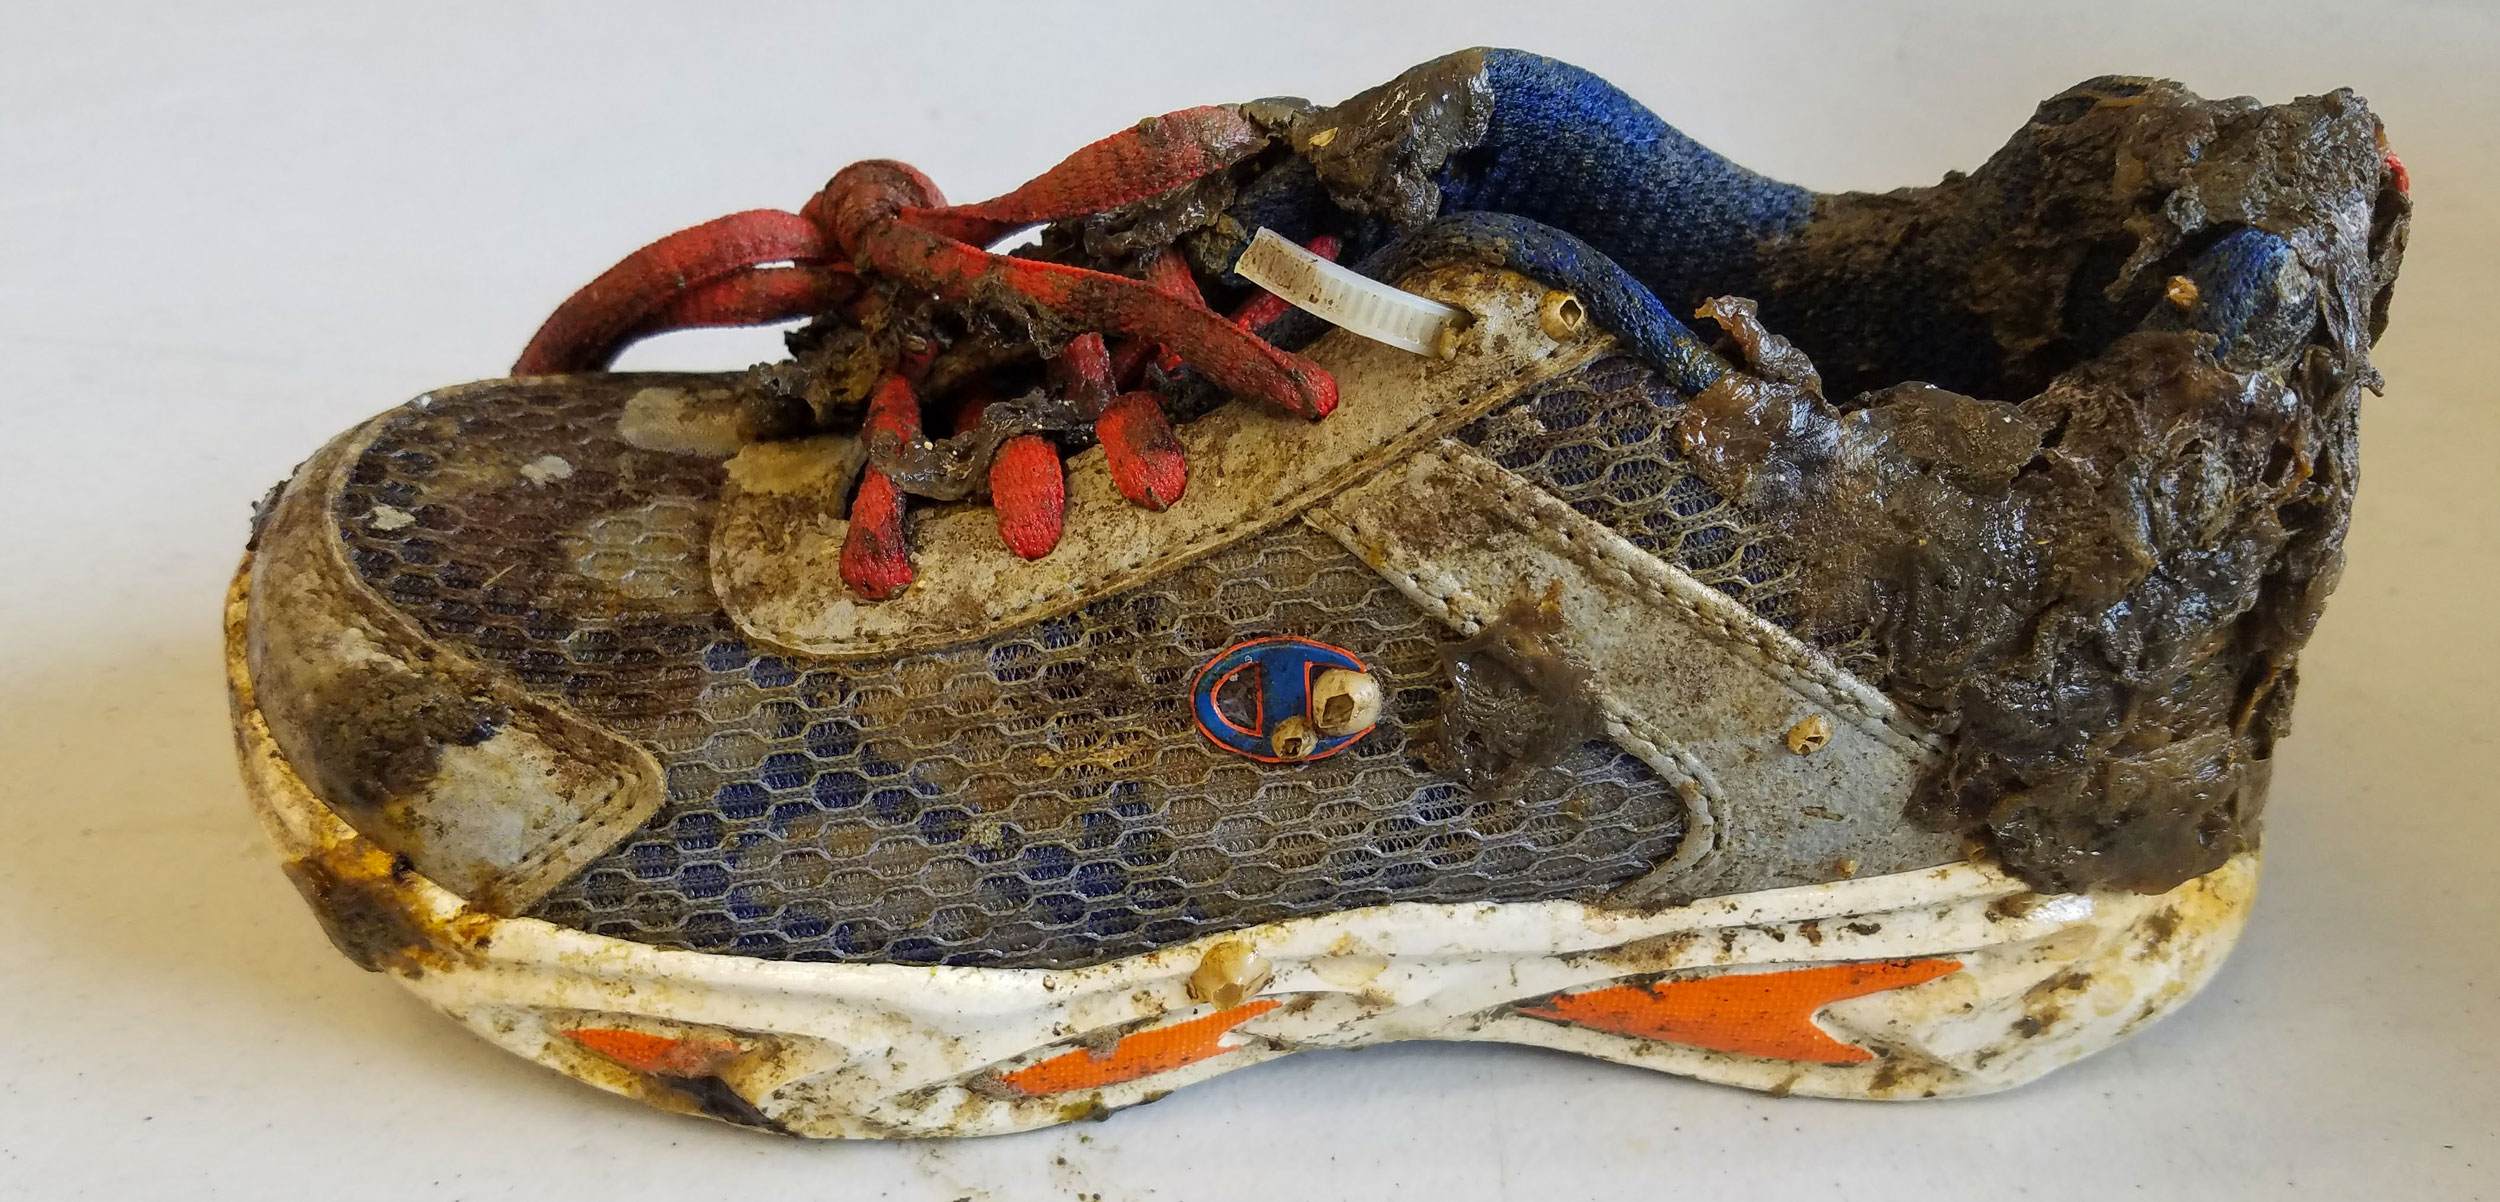 sneaker with barnacles on it